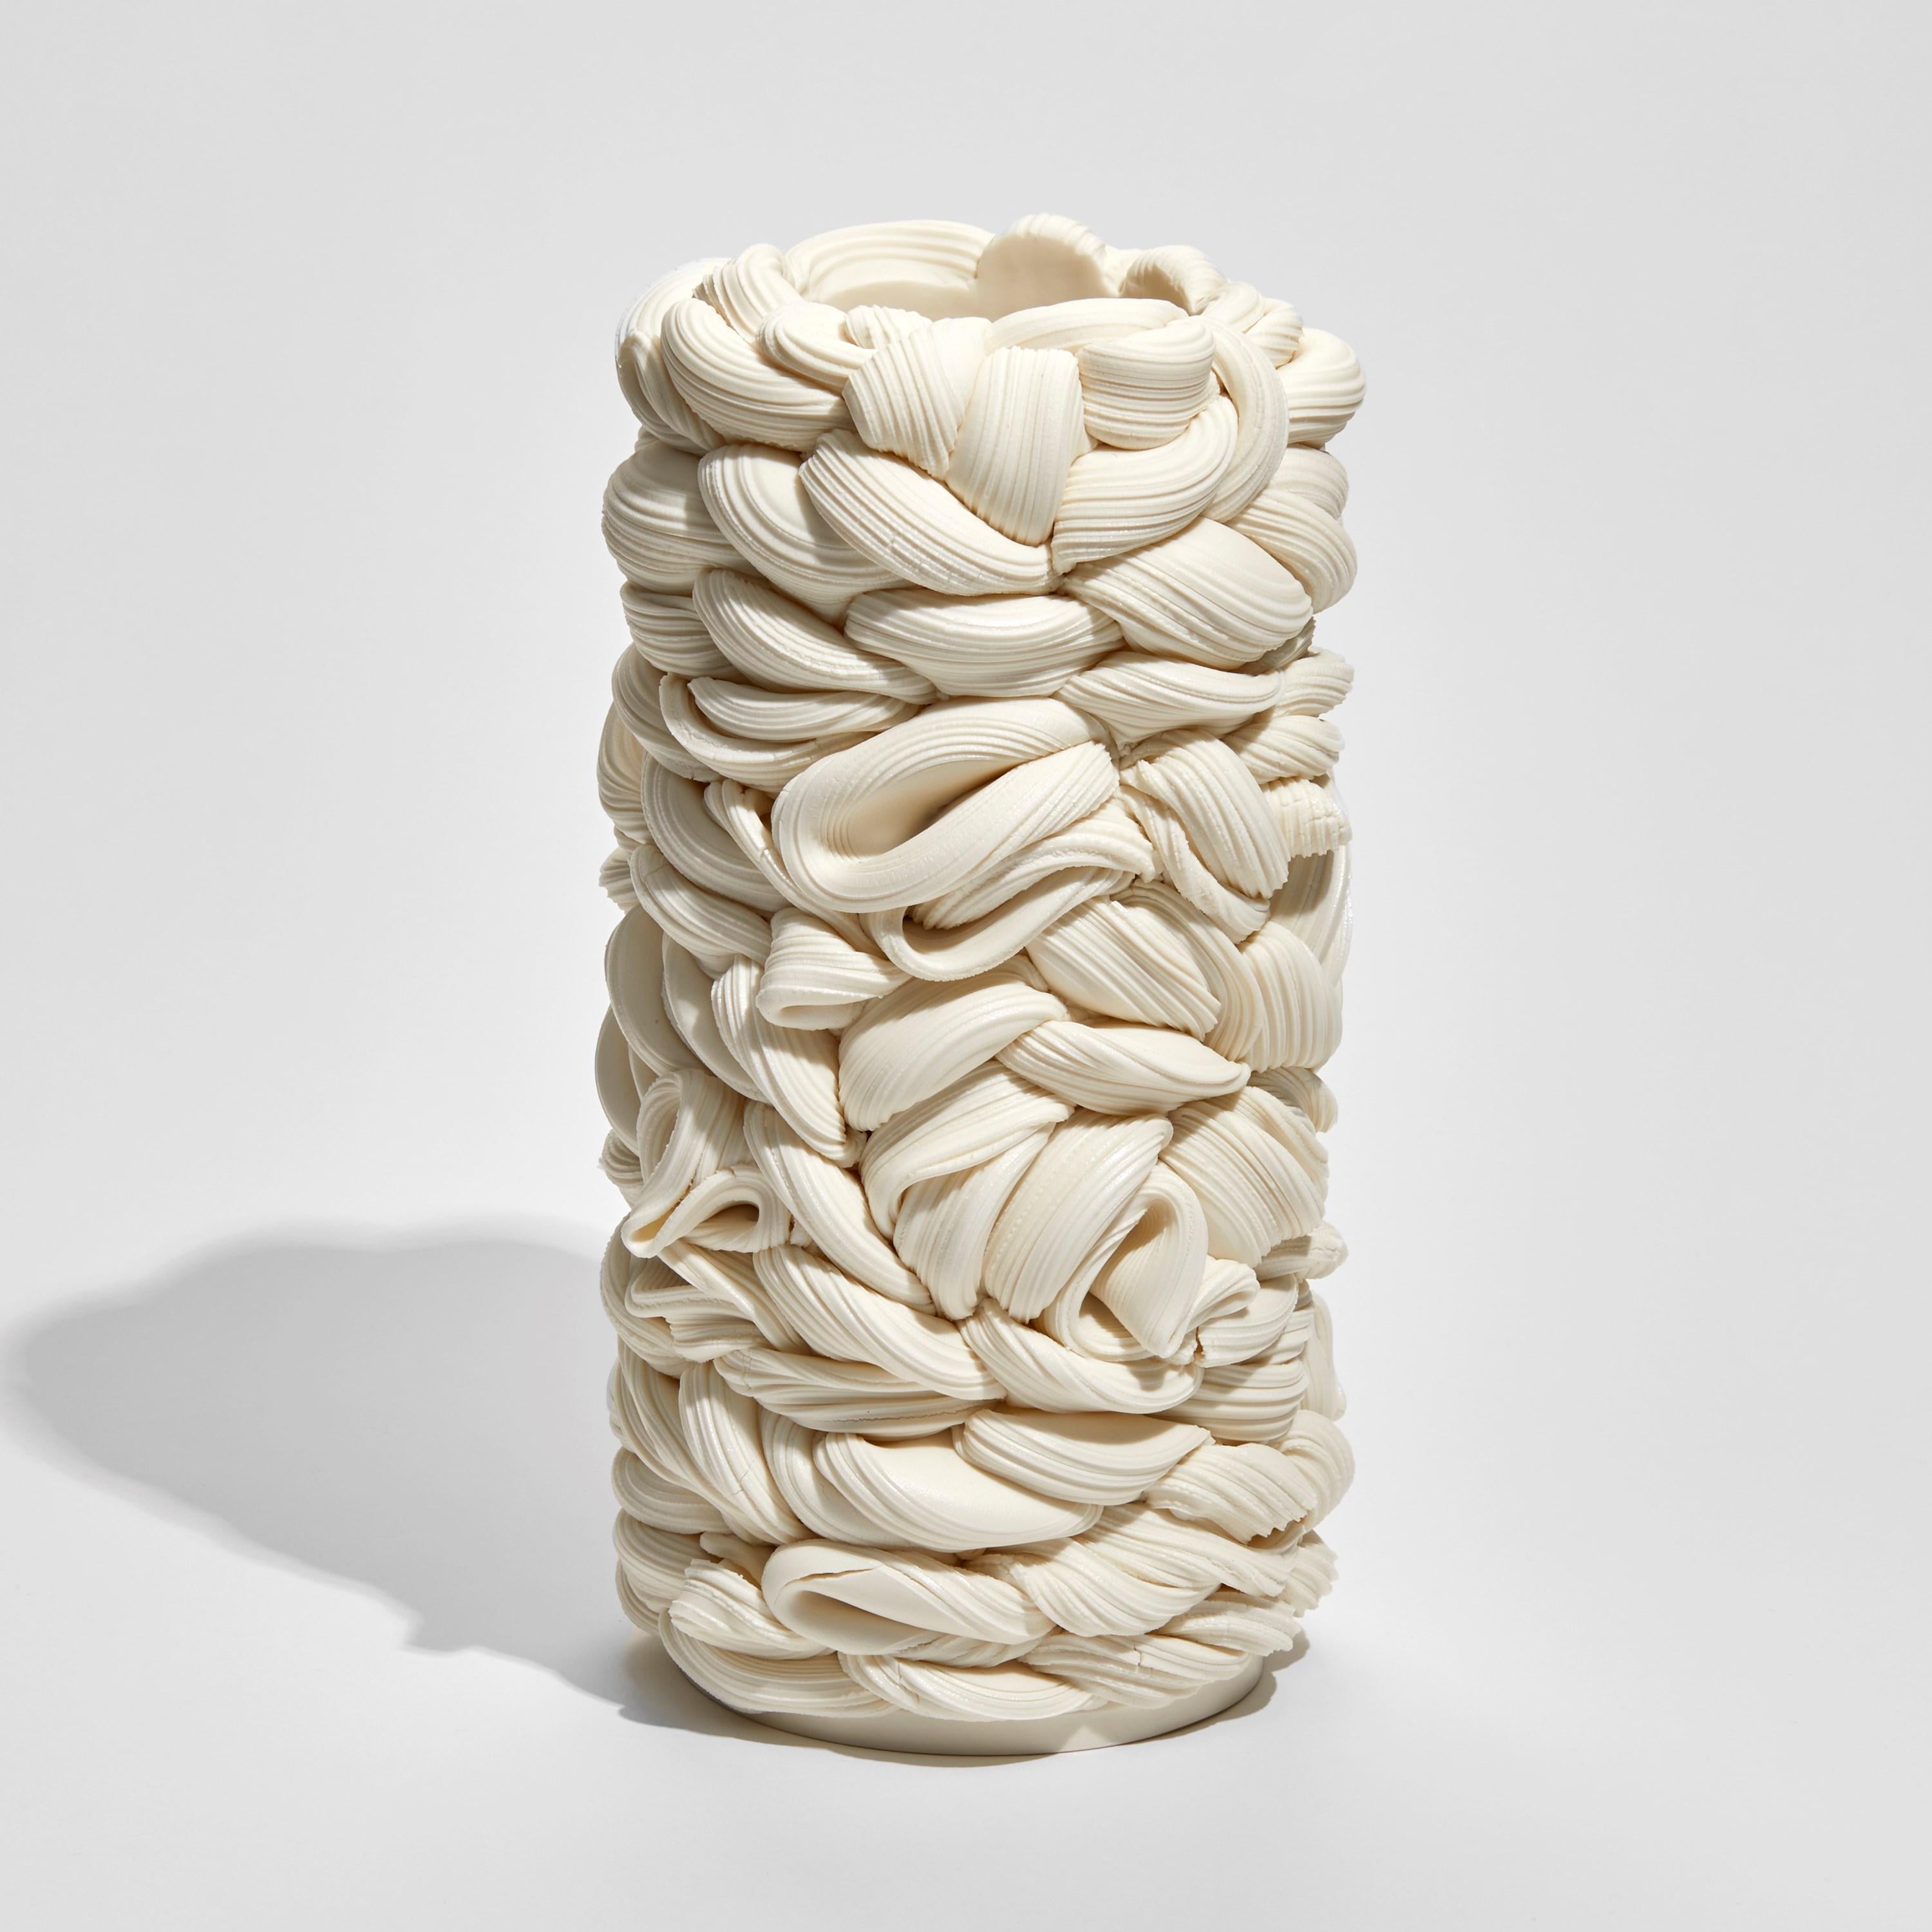 Hand-Crafted Achromatic Fold in White II, a Parian Porcelain Vessel by Steven Edwards For Sale